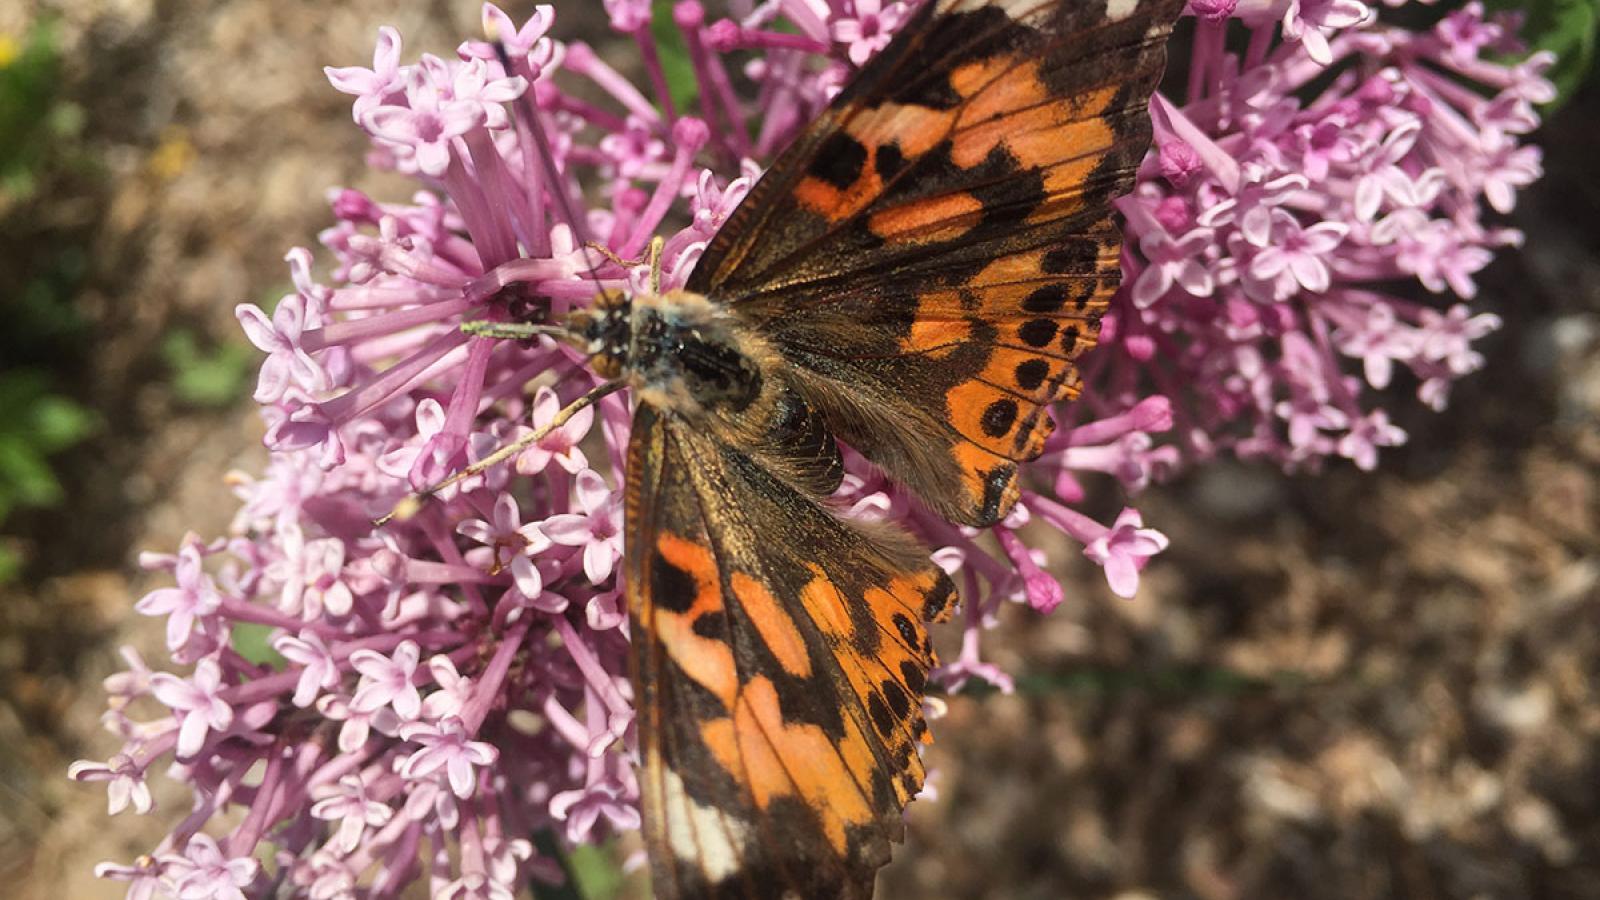 Photograph of a released Painted Lady butterfly on a lilac after the completion of our WOW Insect Unit